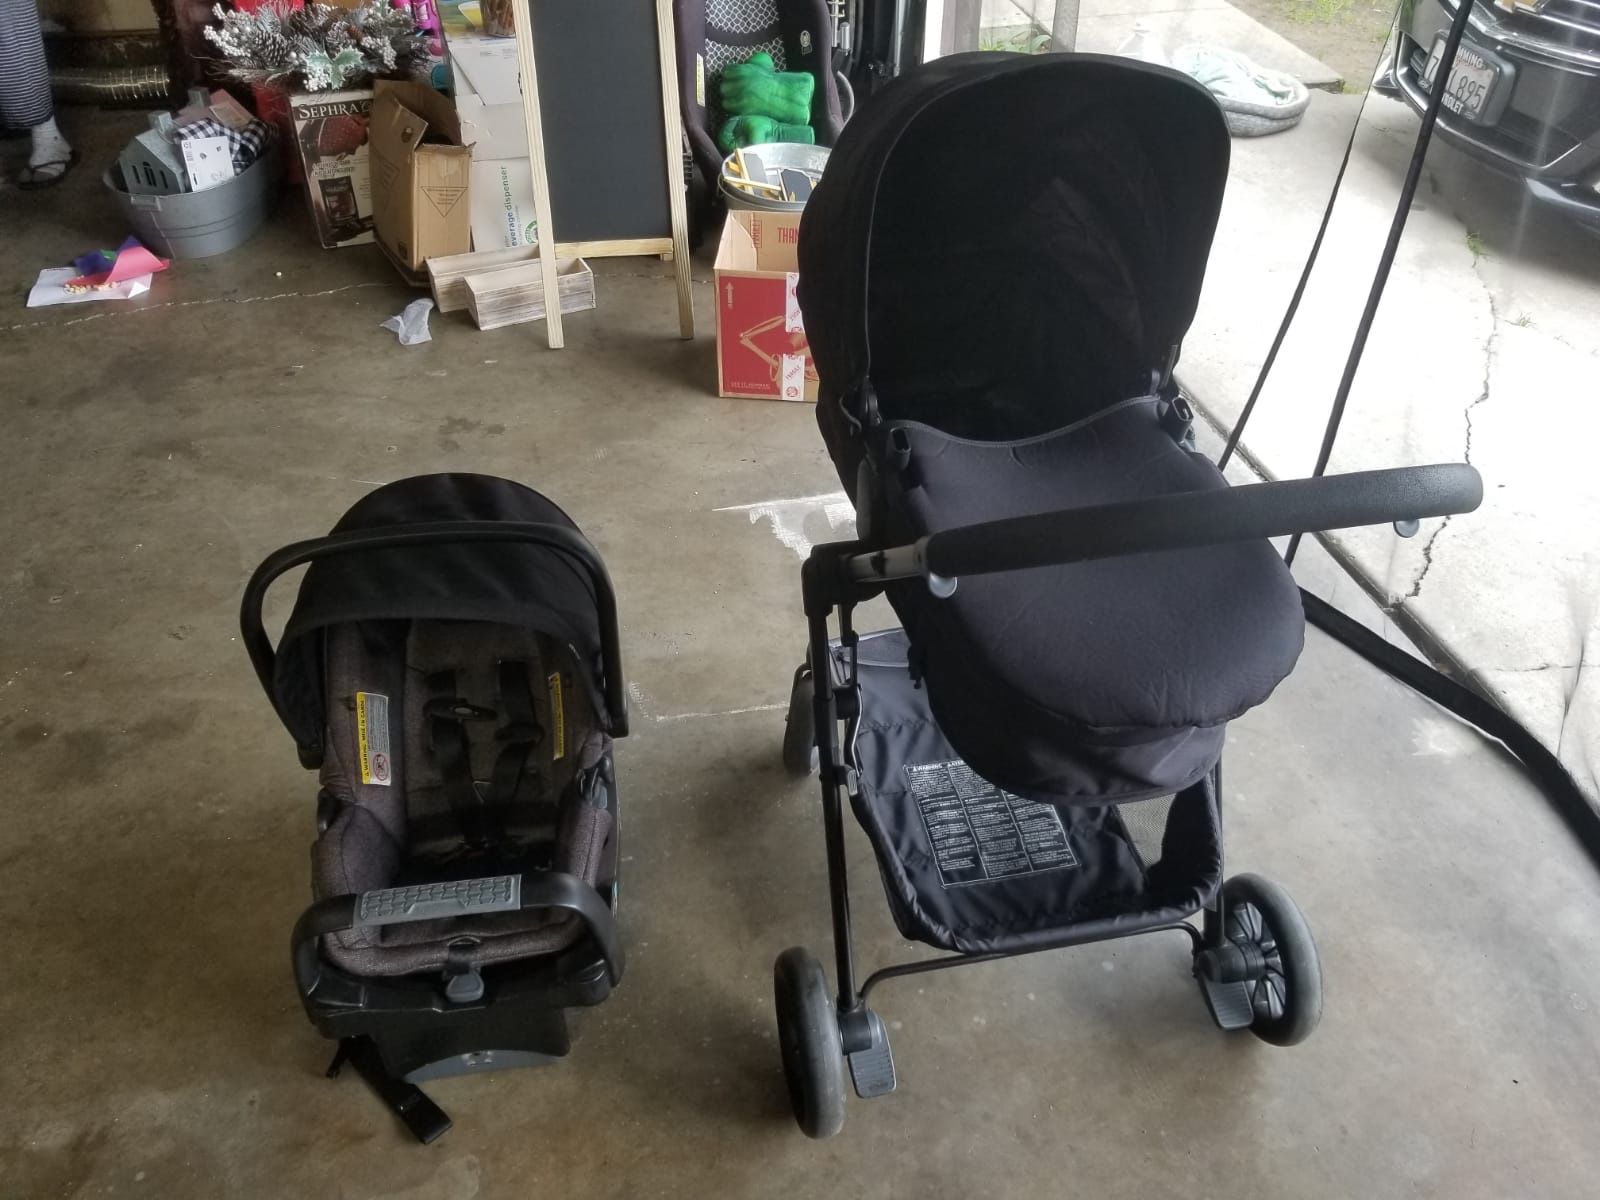 Infant stroller and car seat